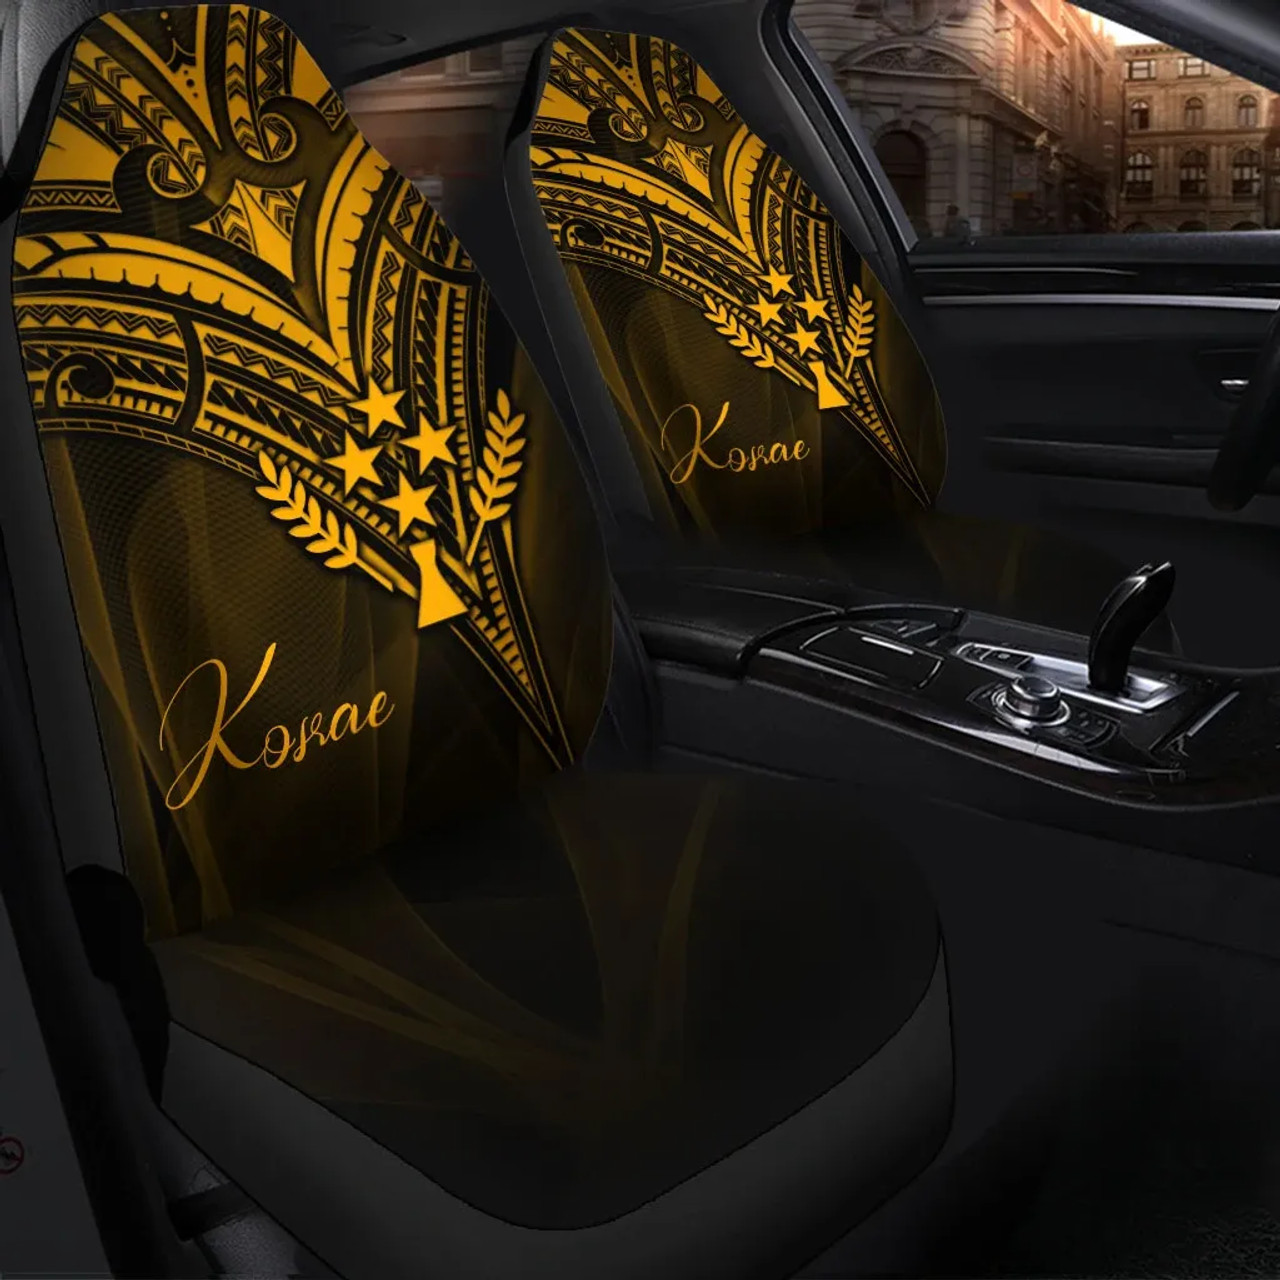 Kosrae State Car Seat Cover - Gold Color Cross Style